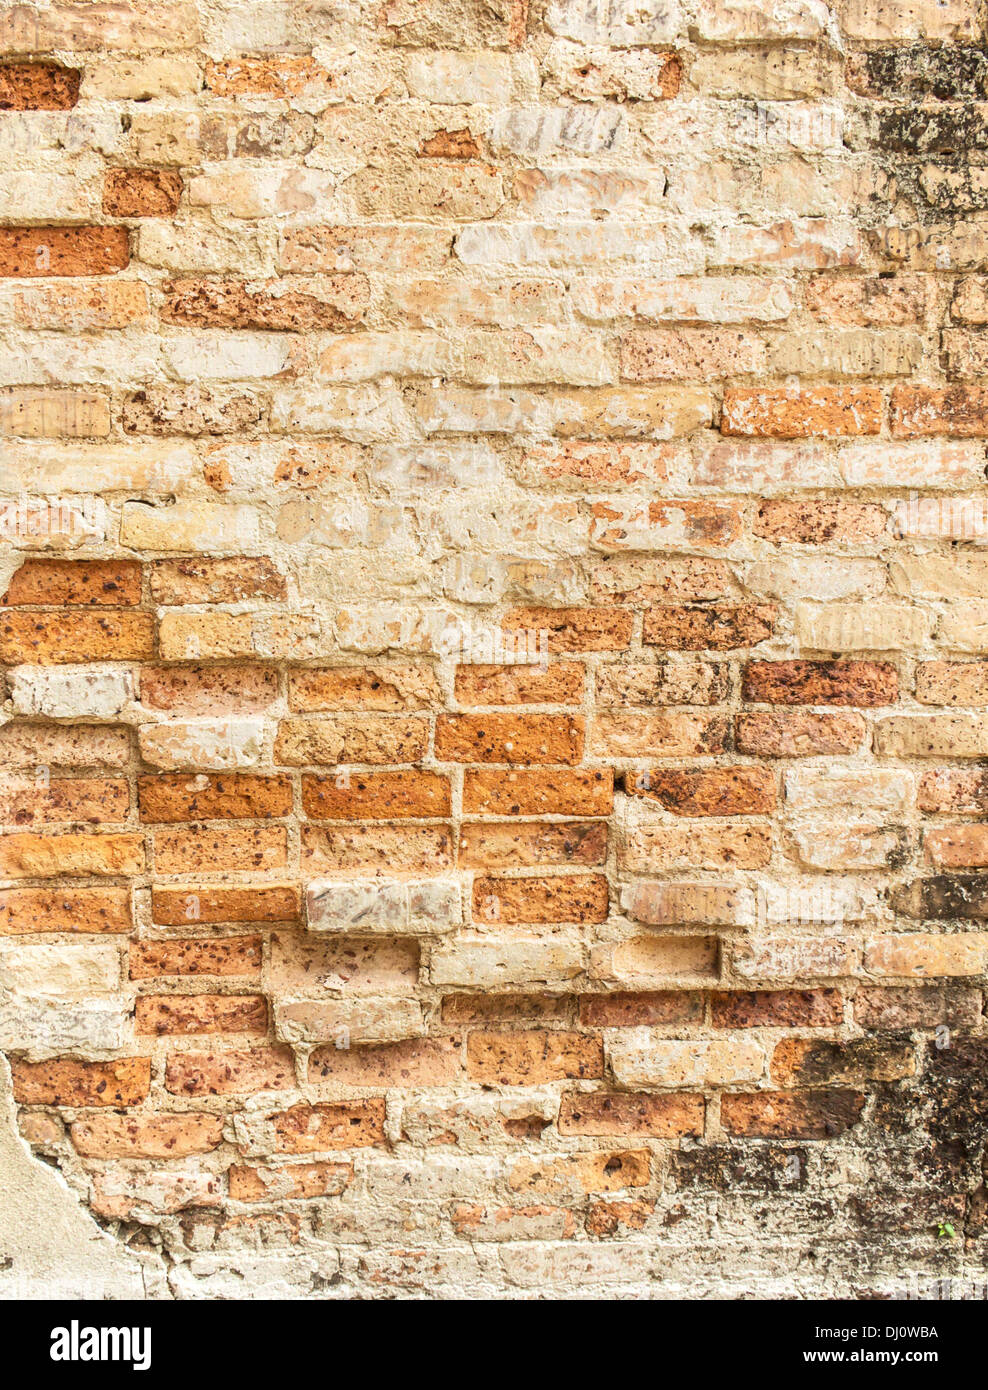 old cracked concrete vintage brick wall background Stock Photo